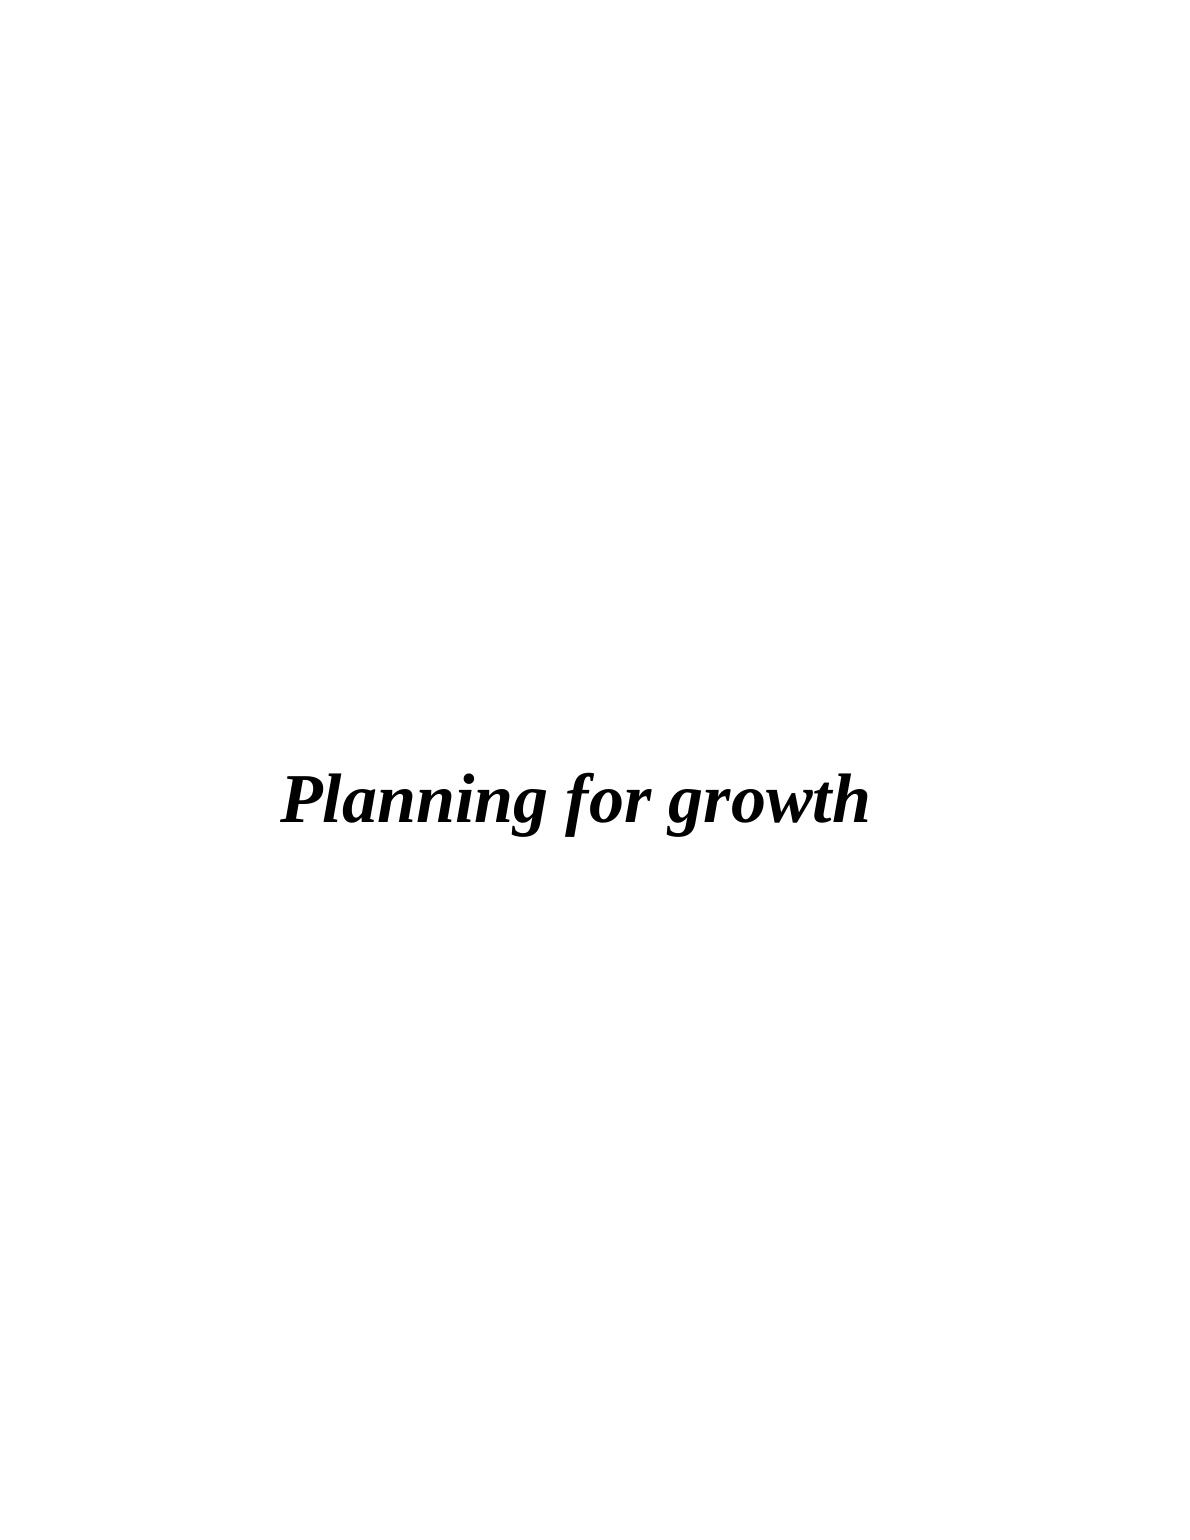 Planning for growth Contents INTRODUCTION_1